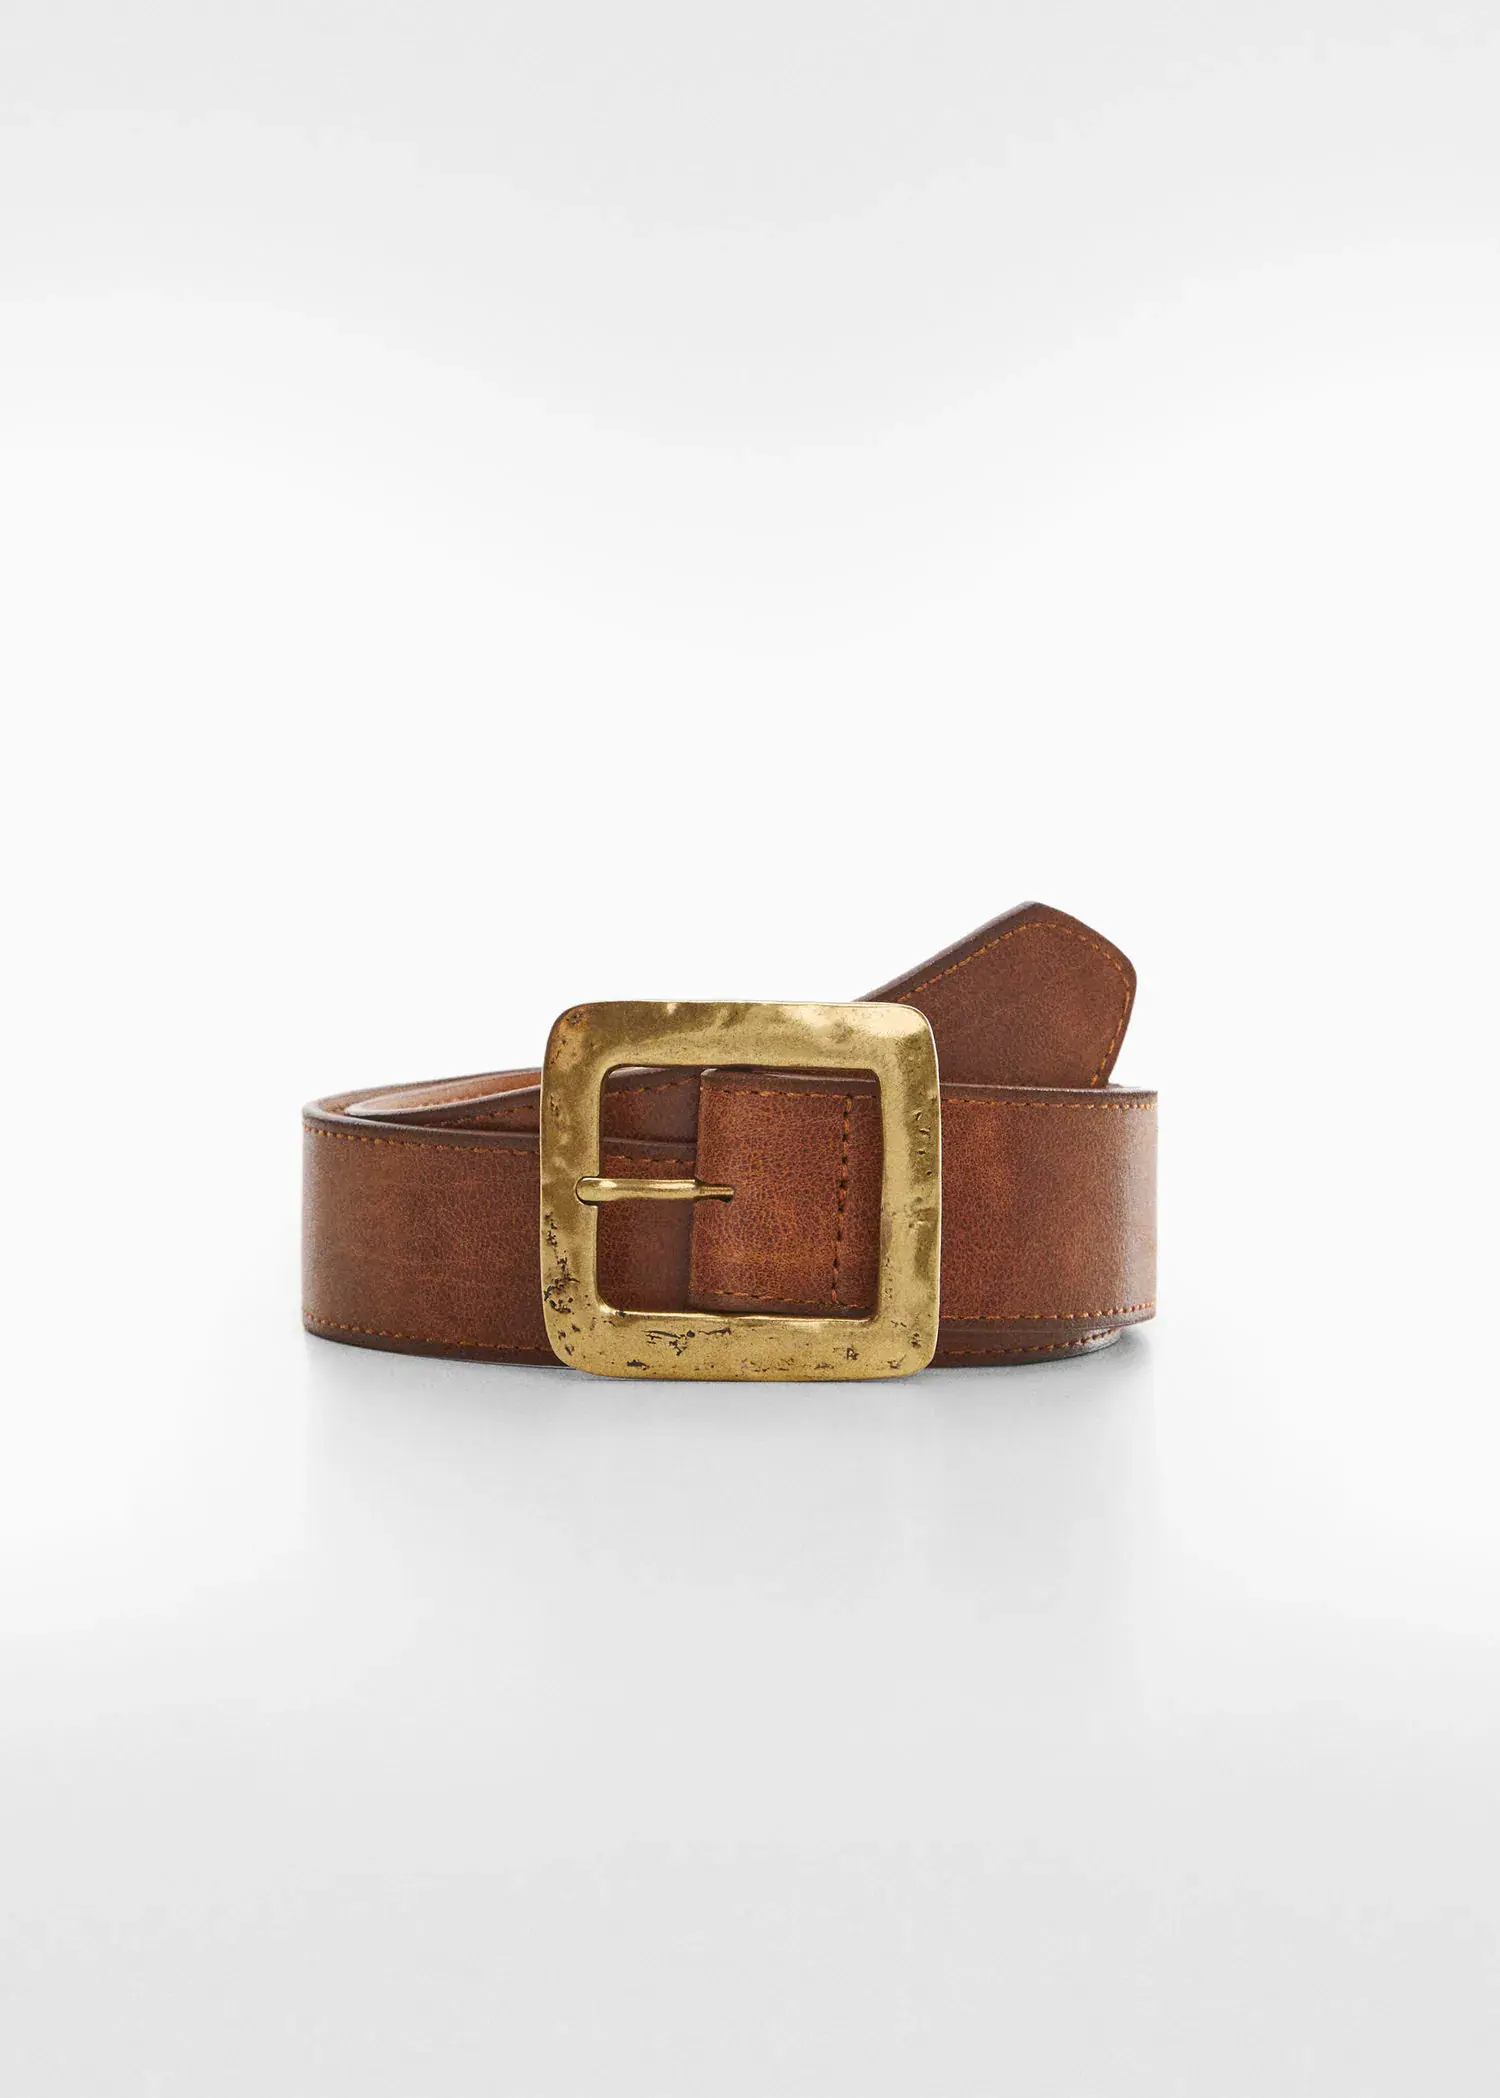 Mango Textured square buckle belt. a brown leather belt with a gold buckle. 